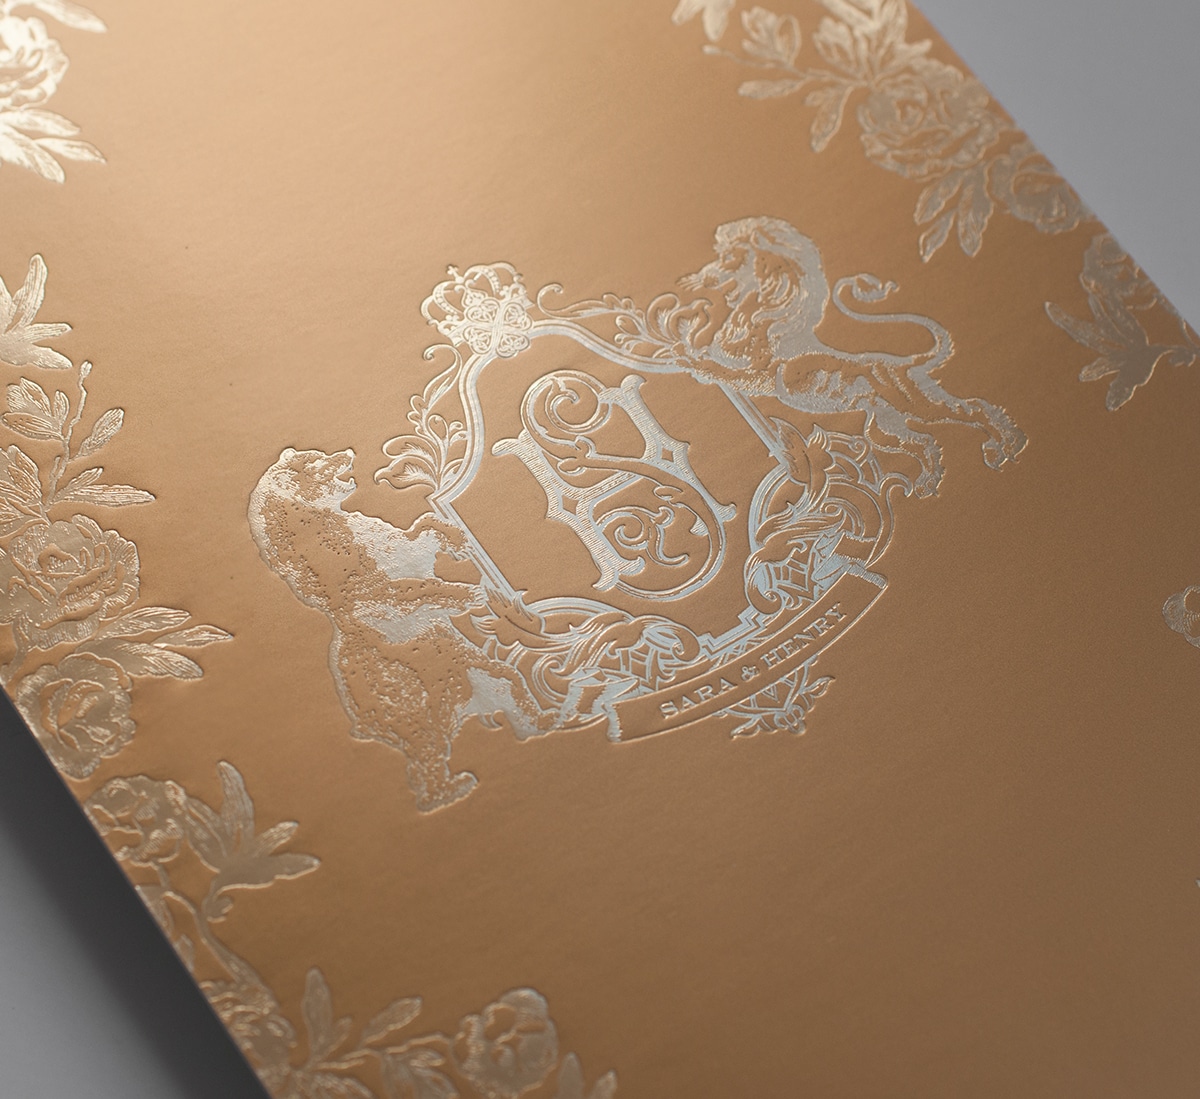 Gold crest on gold paper